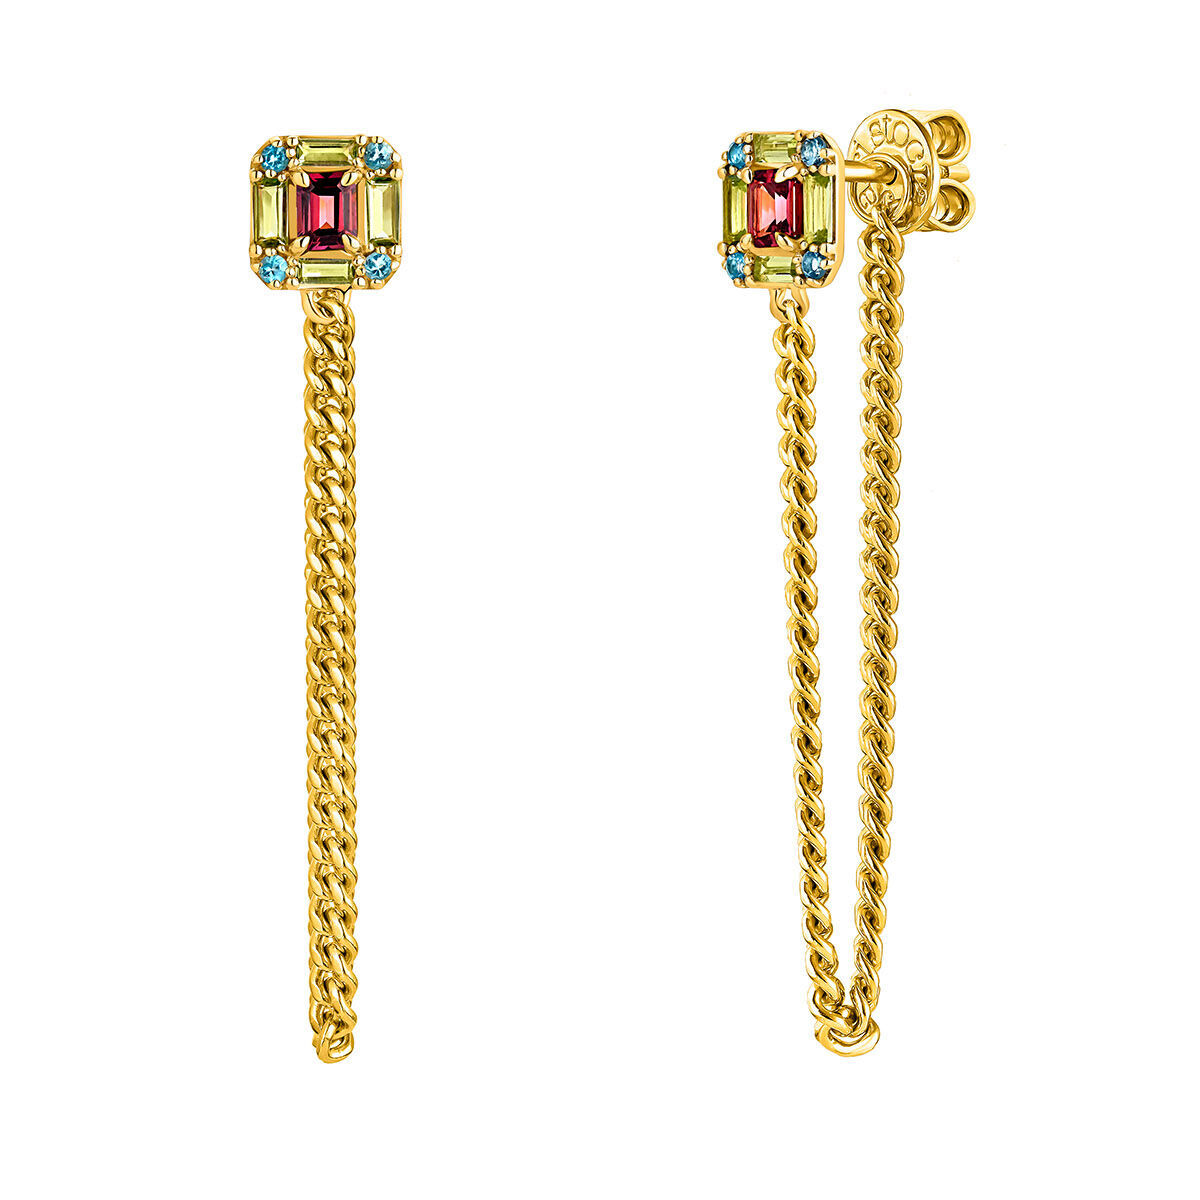 Long chain earrings in 18kt yellow gold-plated silver with multicoloured stones, J04925-02-RO-PE-LB, hi-res